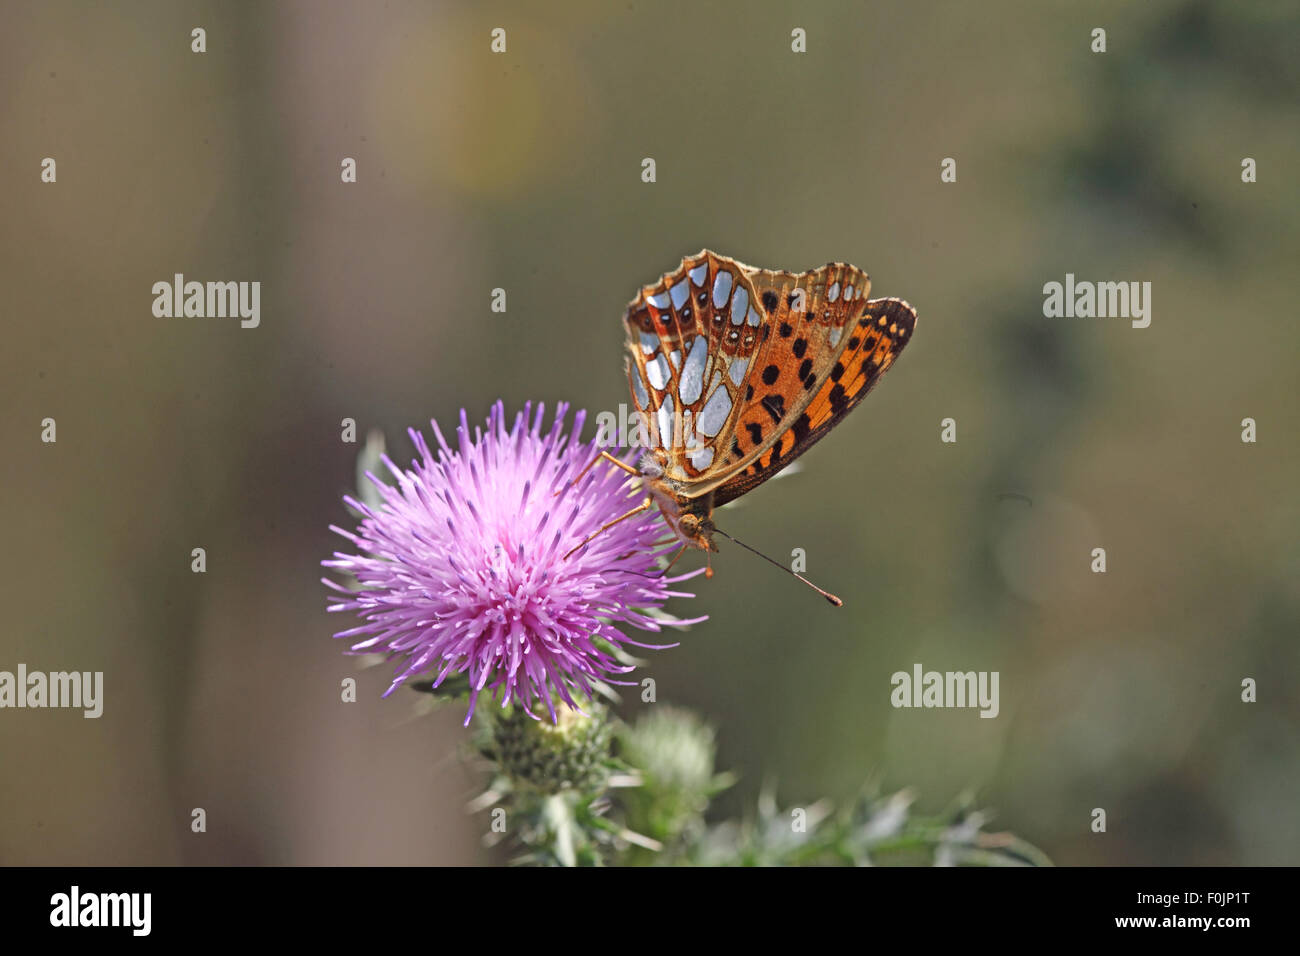 Queen of Spain fritillary Issoria lithonia taking nectar from thistle Stock Photo